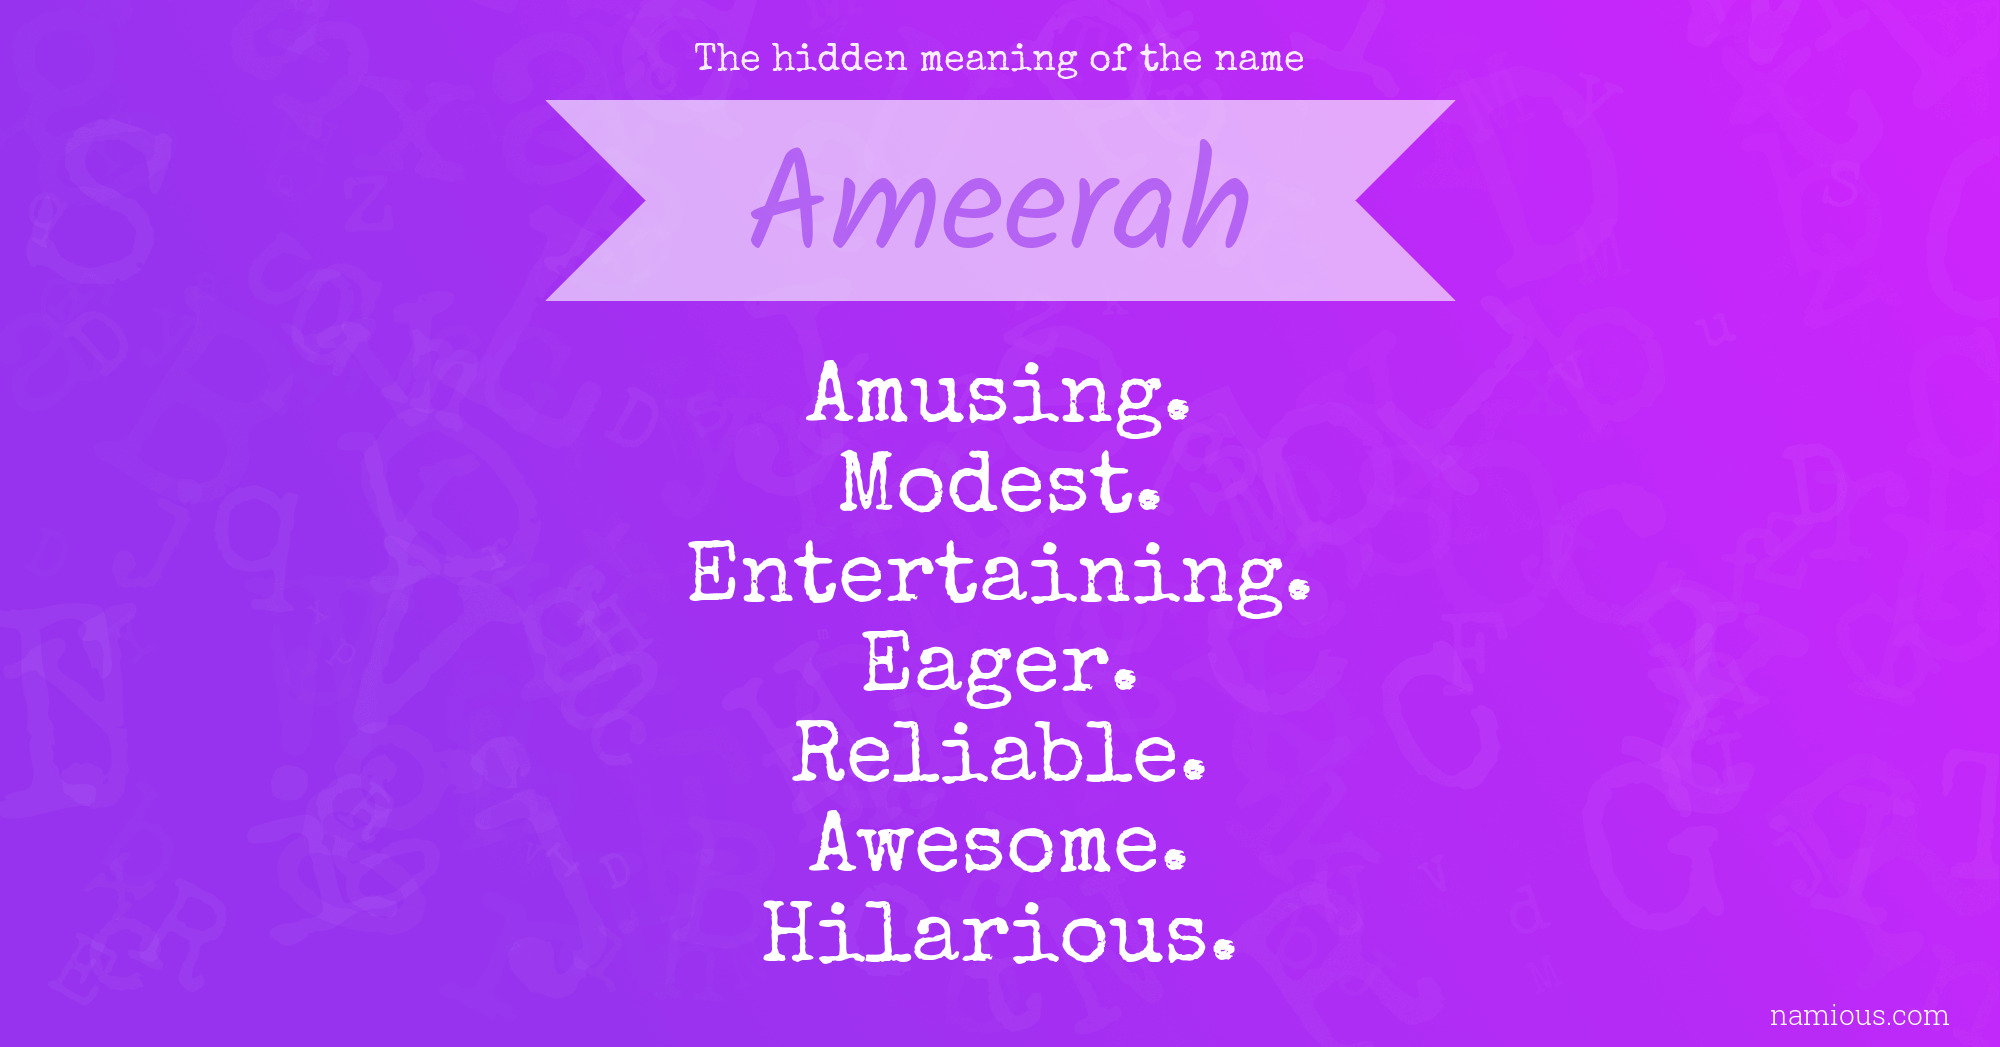 The hidden meaning of the name Ameerah